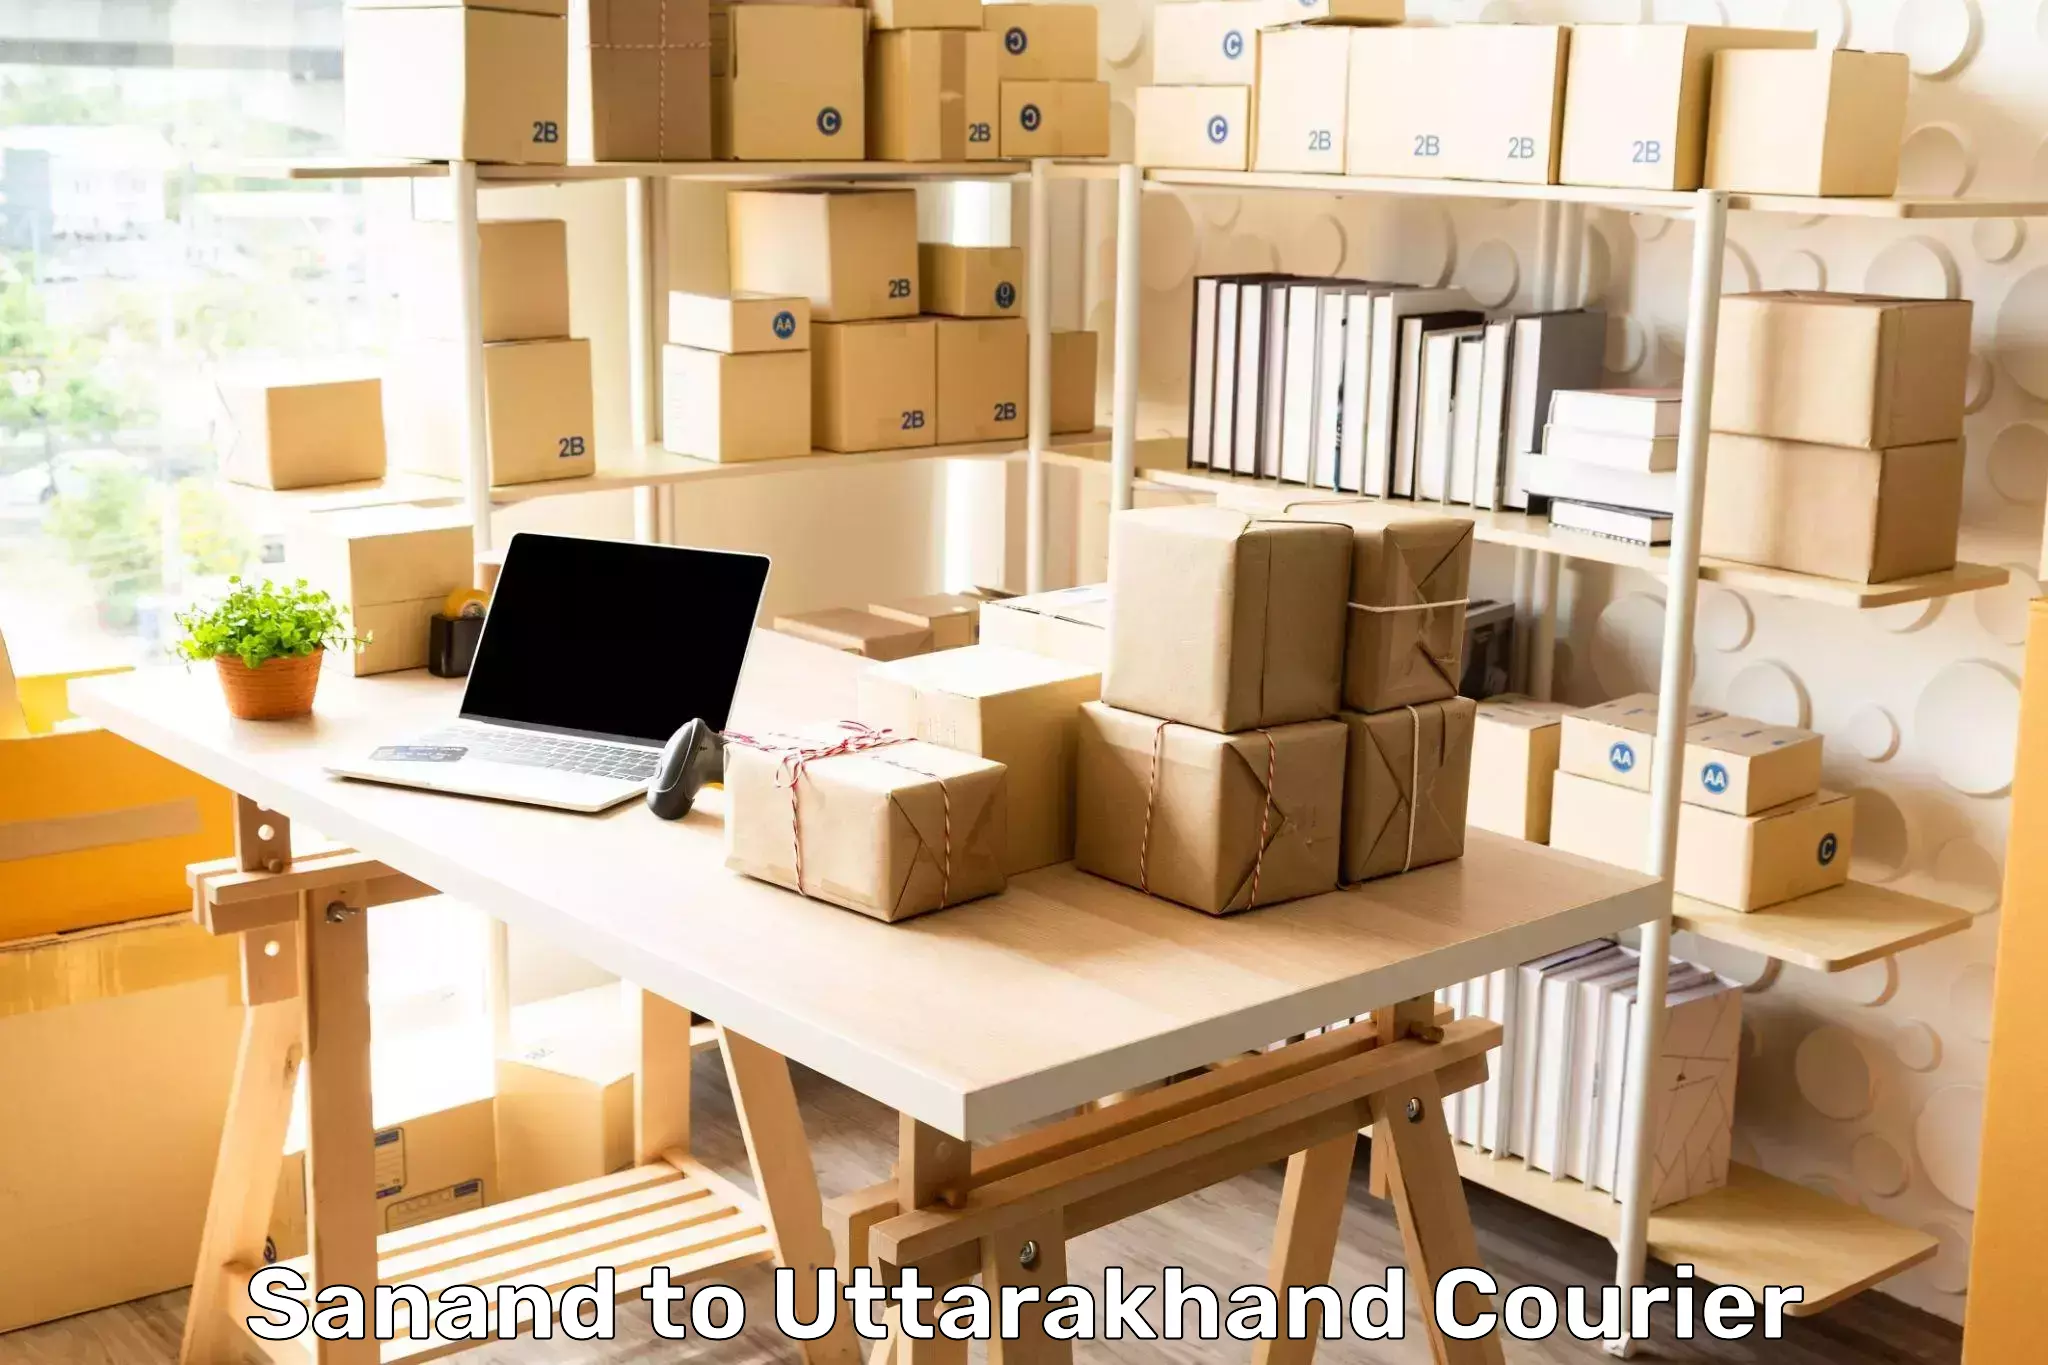 Logistics service provider Sanand to Roorkee